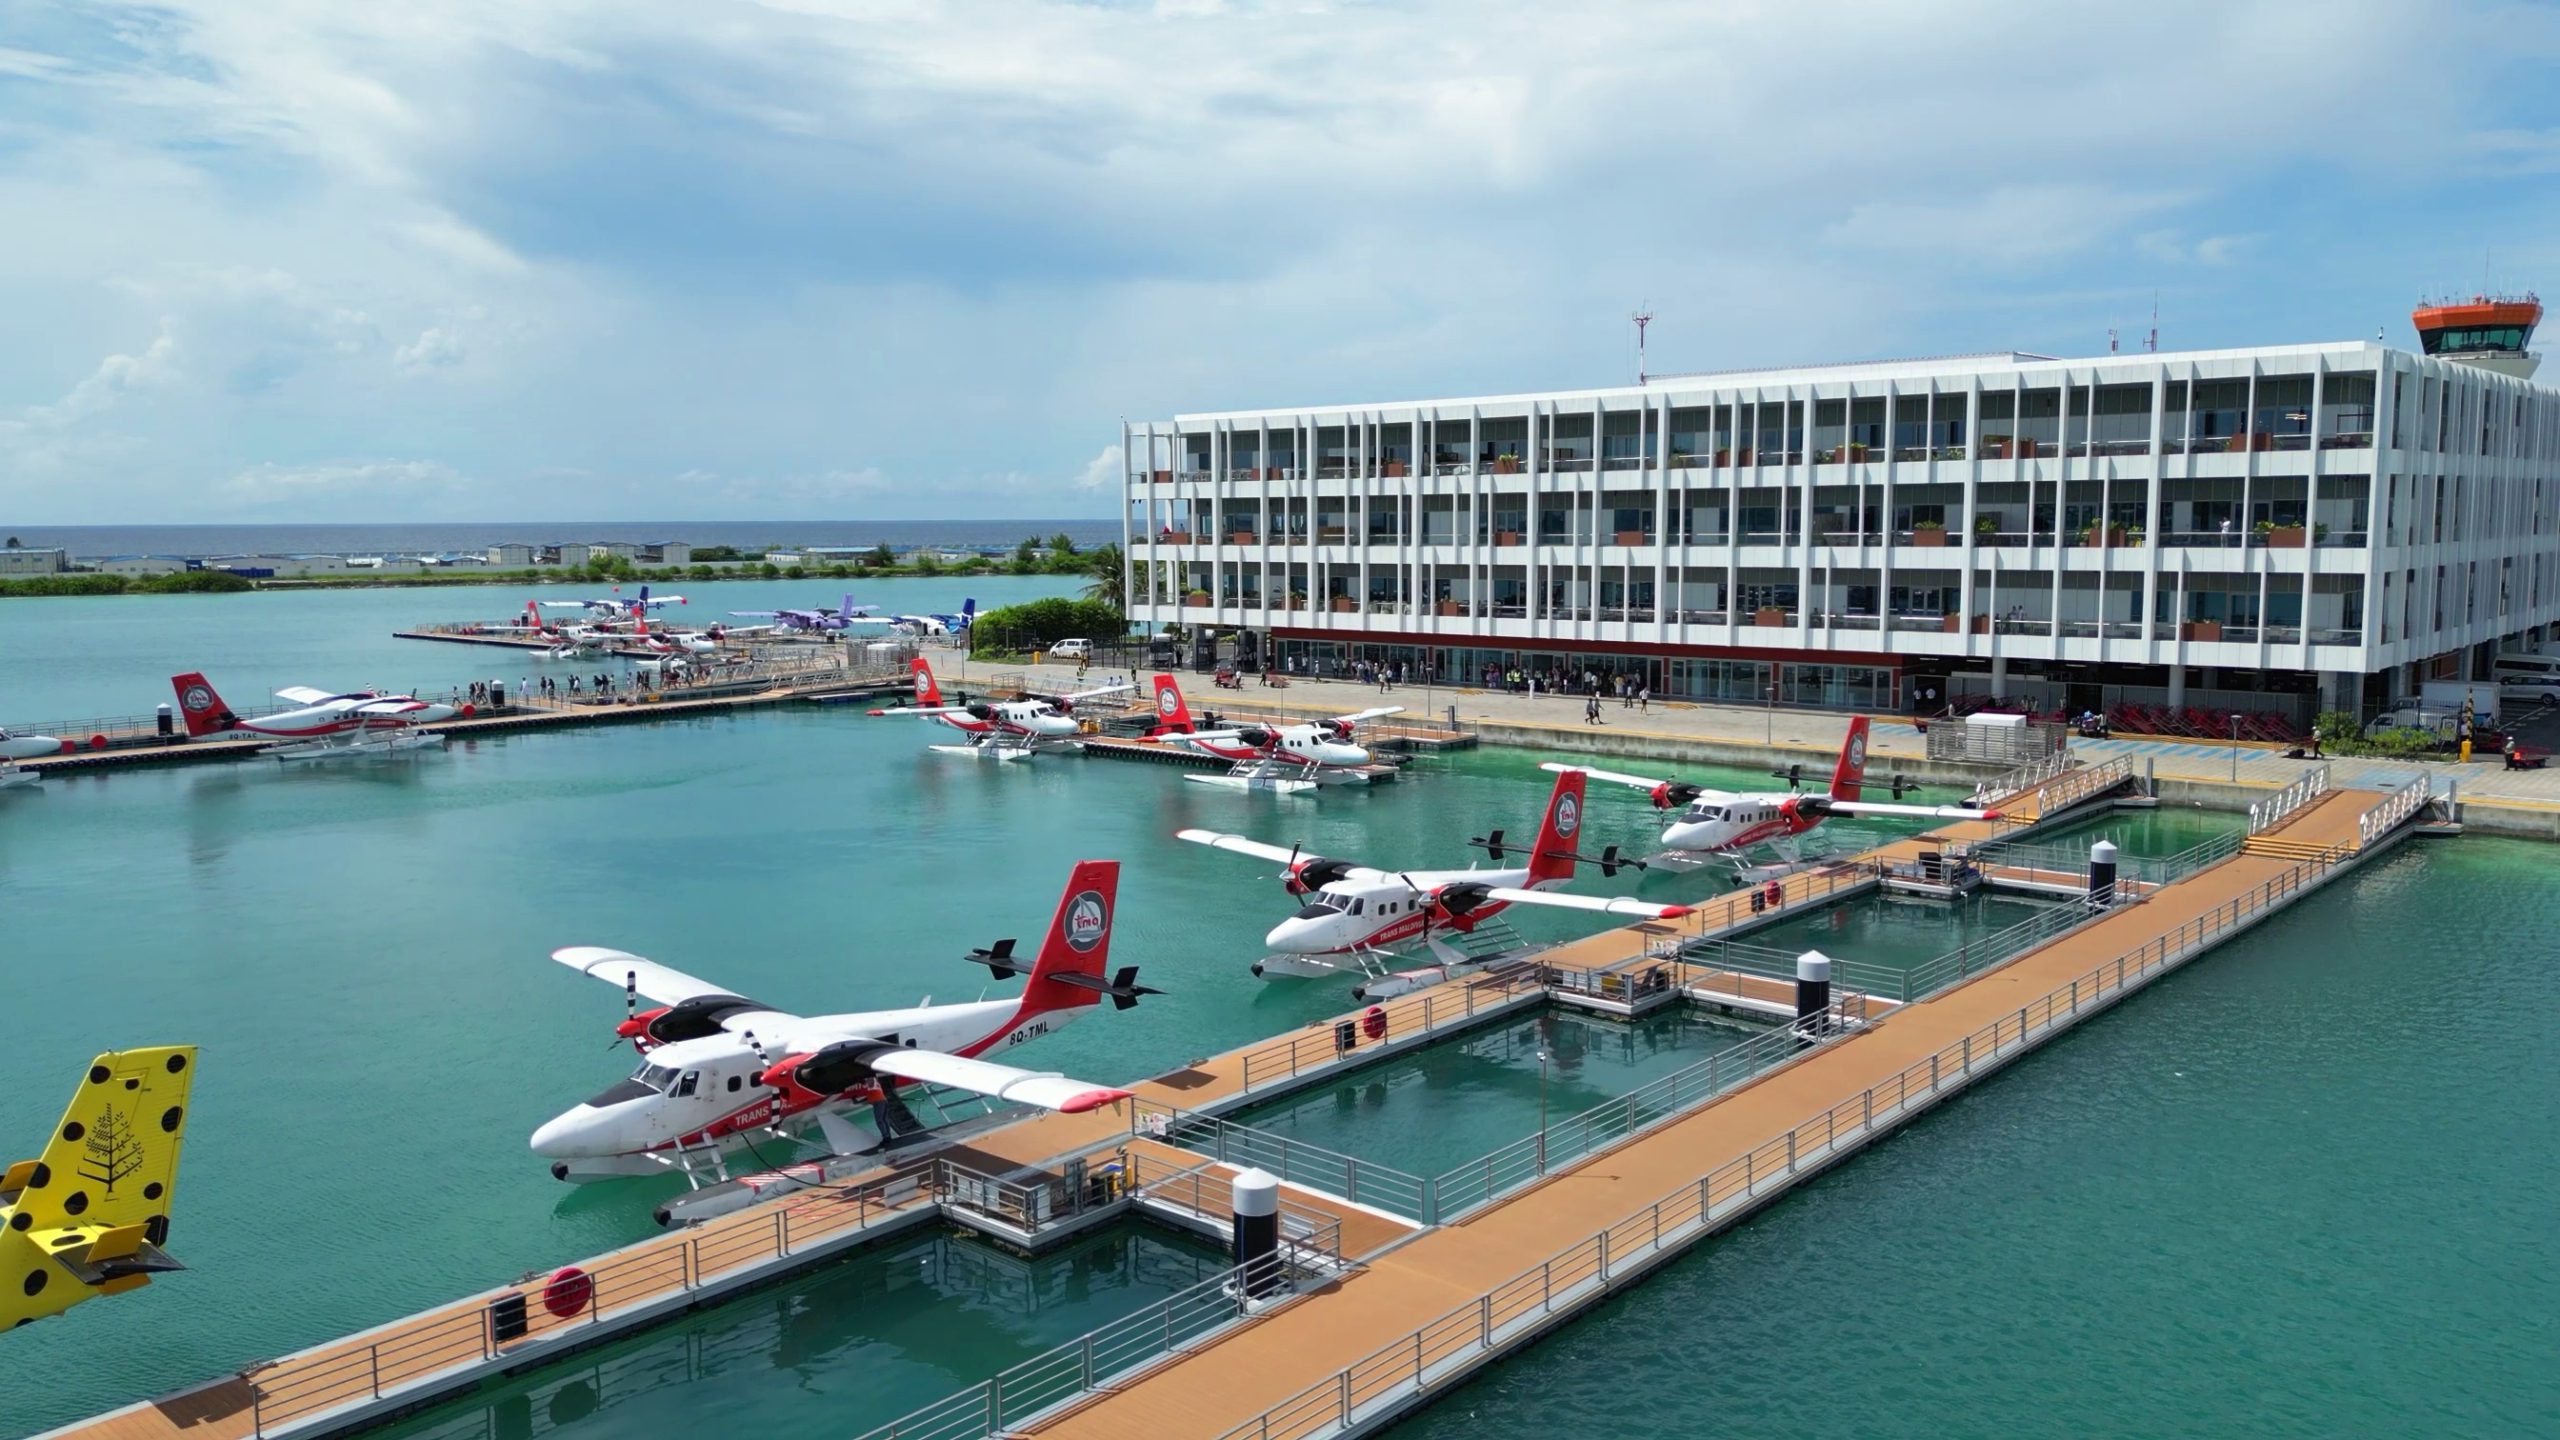 WITH 649 SEAPLANES IN A DAY VIA BREAKS RECORD